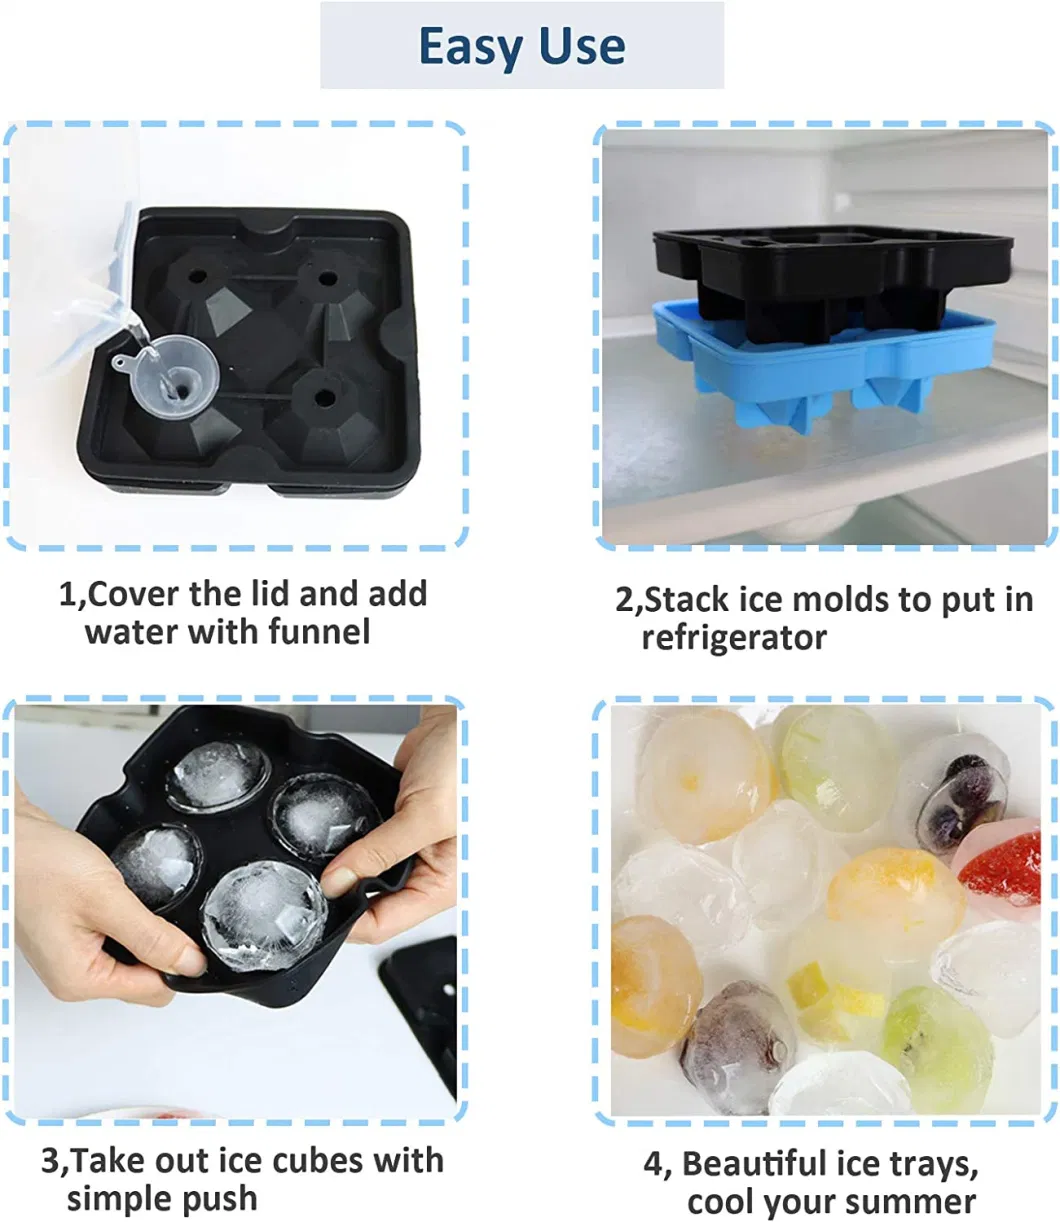 Hot Sale 4 Cavities Food Grade Silicone Diamonds Shaped Ice Mould Silicone Ice Cube Tray